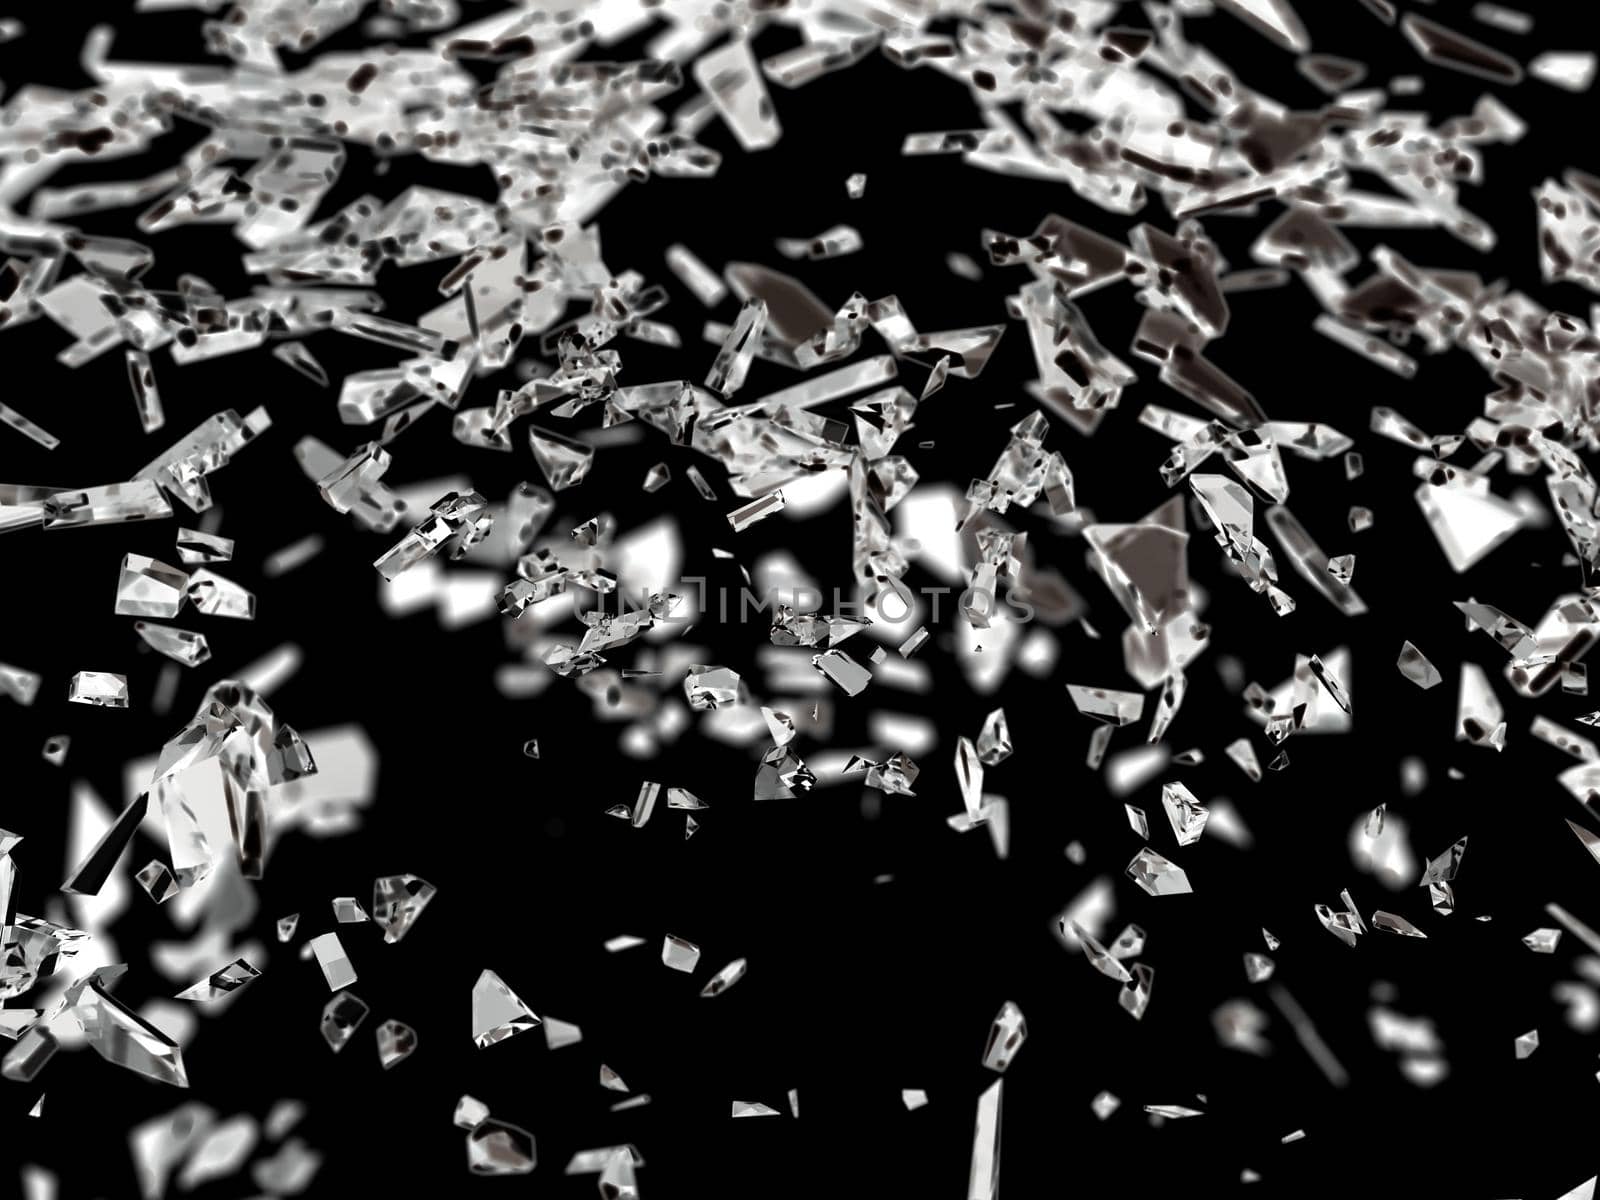 Sharp pieces of smashed glass isolated with shallow DOF